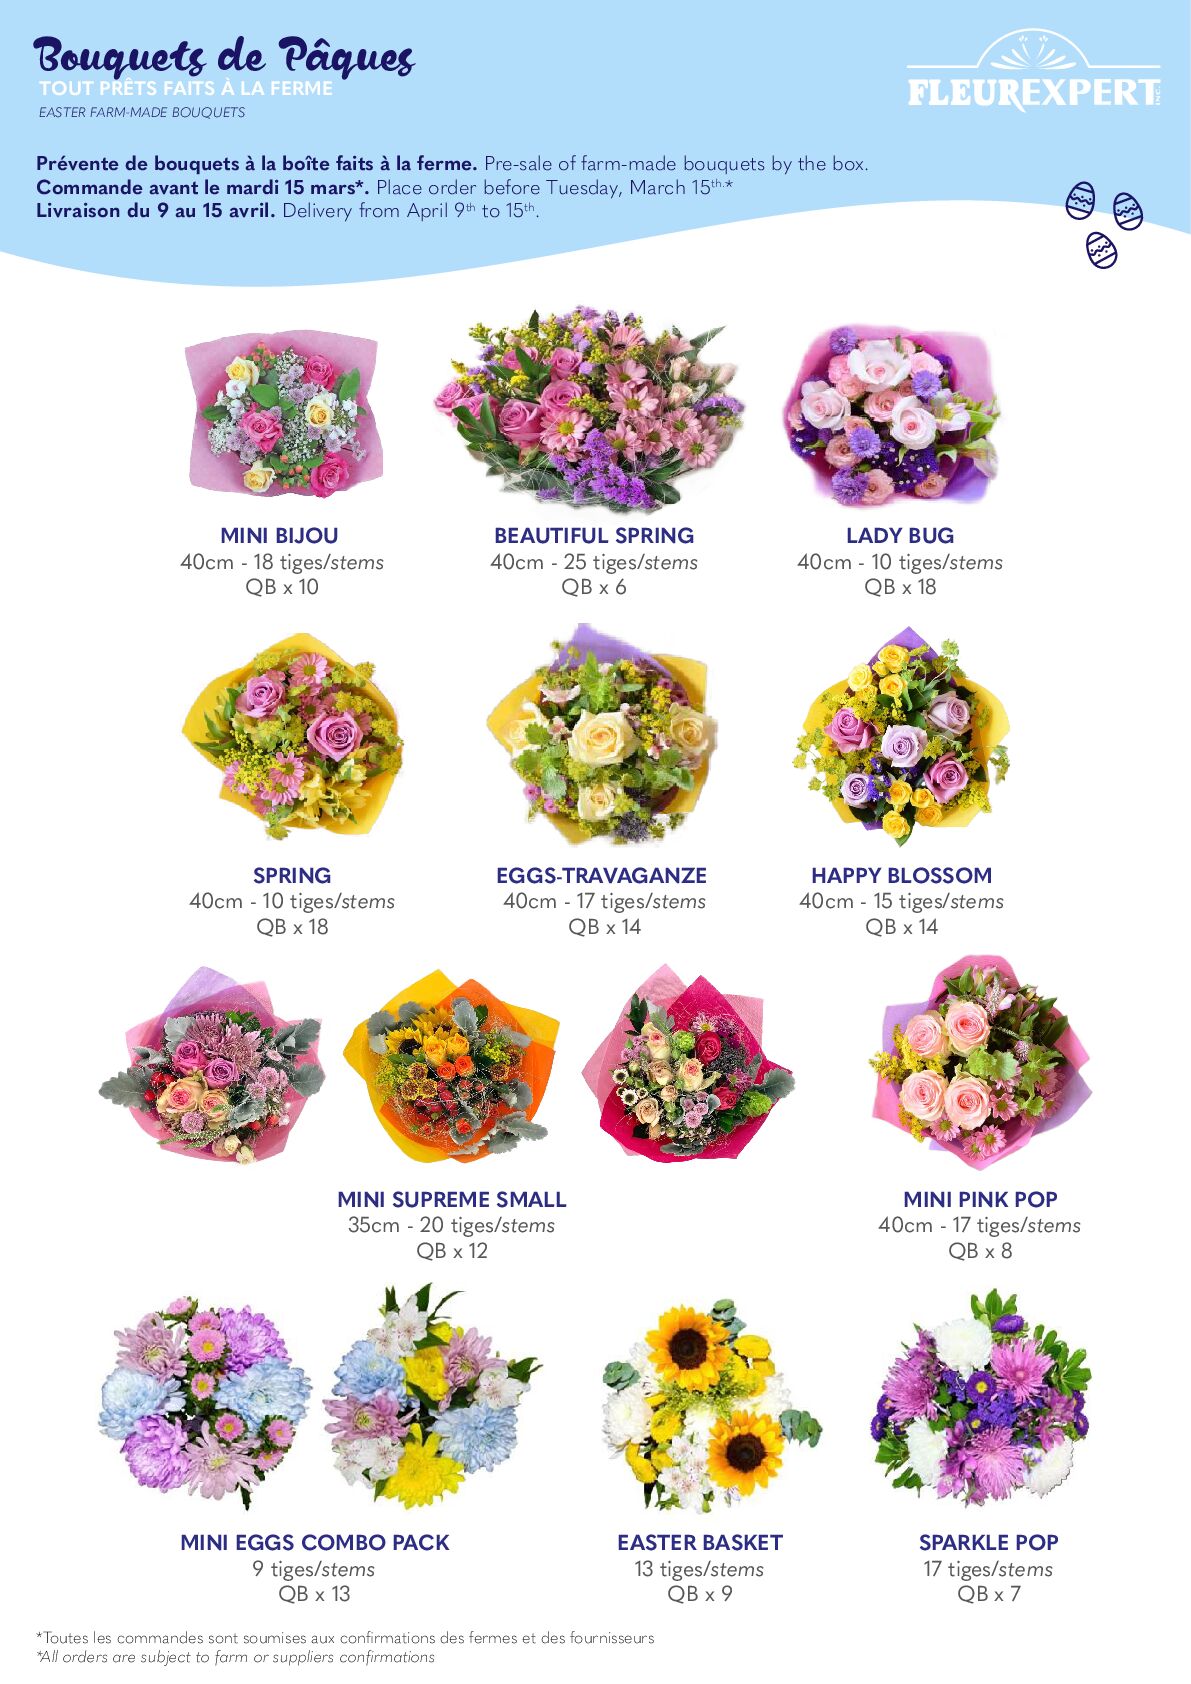 Easter Bouquets Offer - Order Limit Date: March 15th, 11:59 PM - Delivery : From April 9th to 15th, 2022.